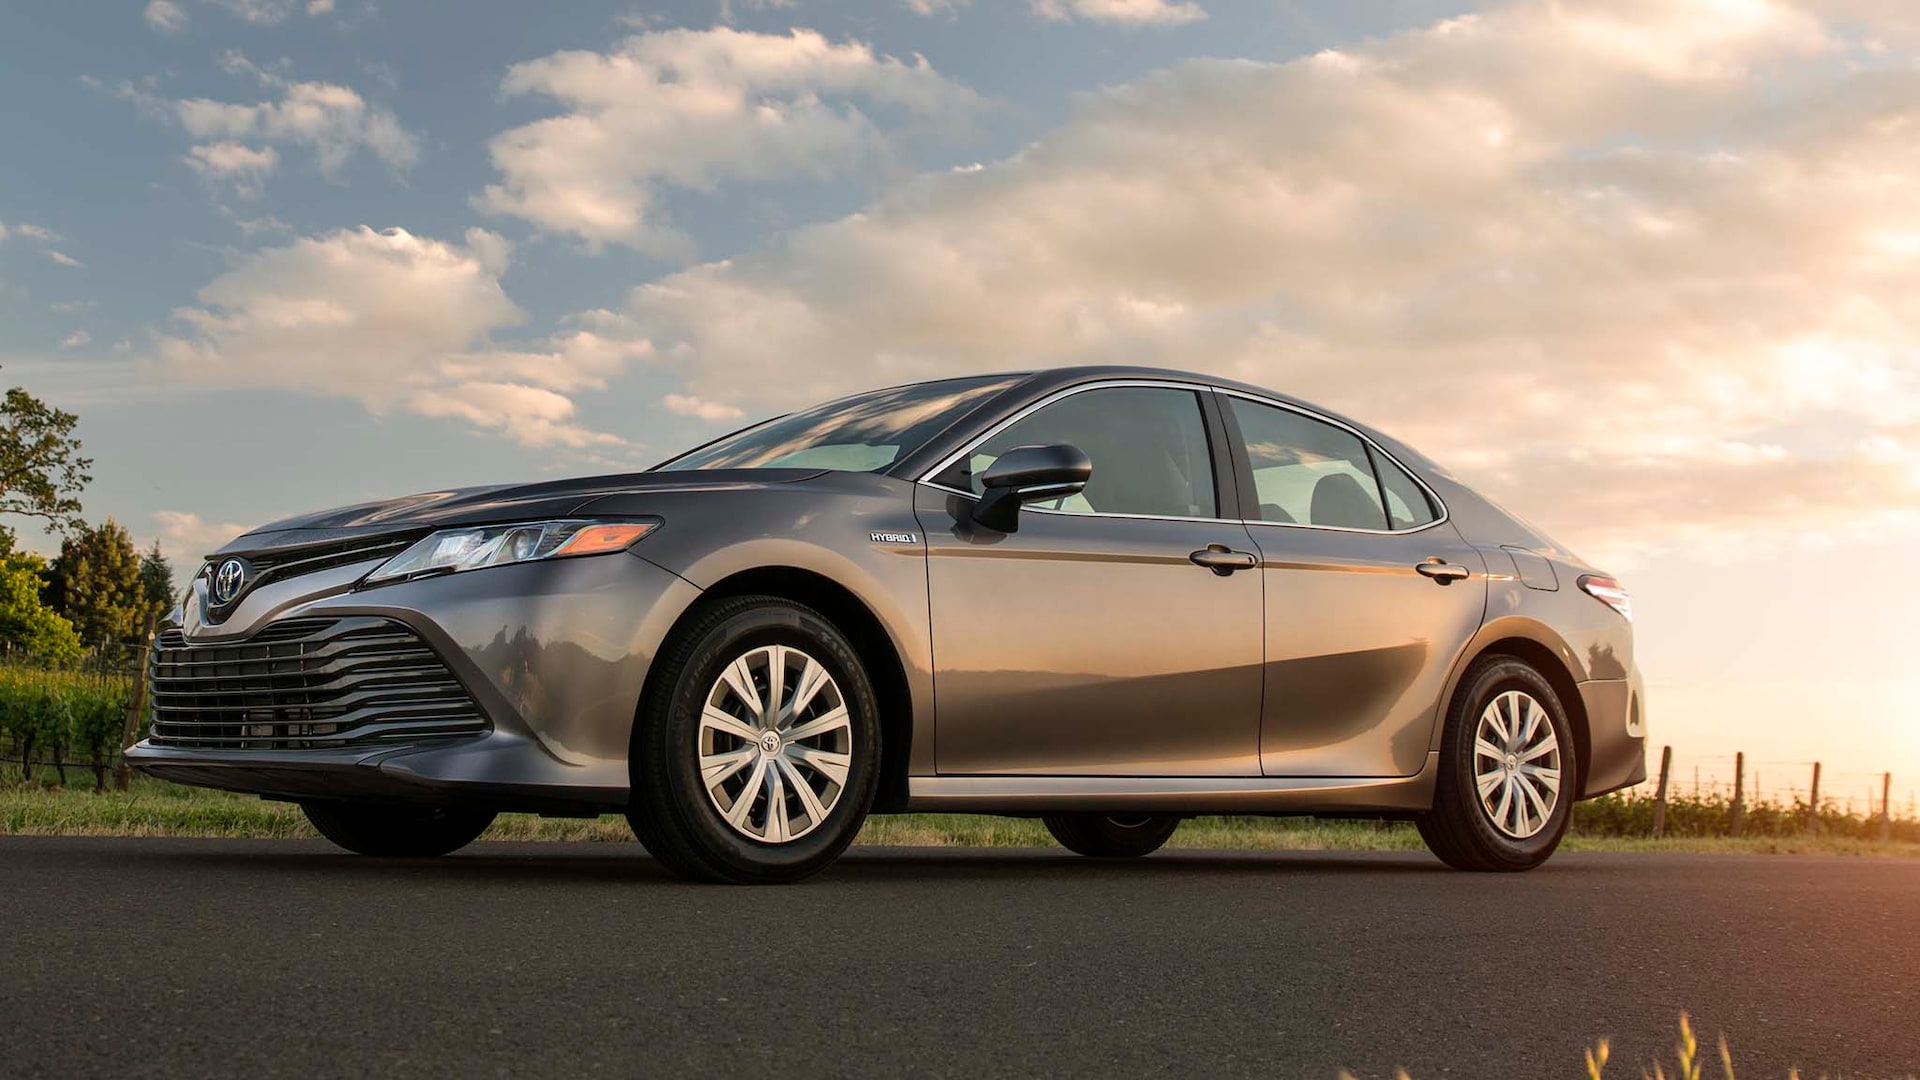 2020 Toyota Camry Hybrid Prices, Reviews, and Photos - MotorTrend